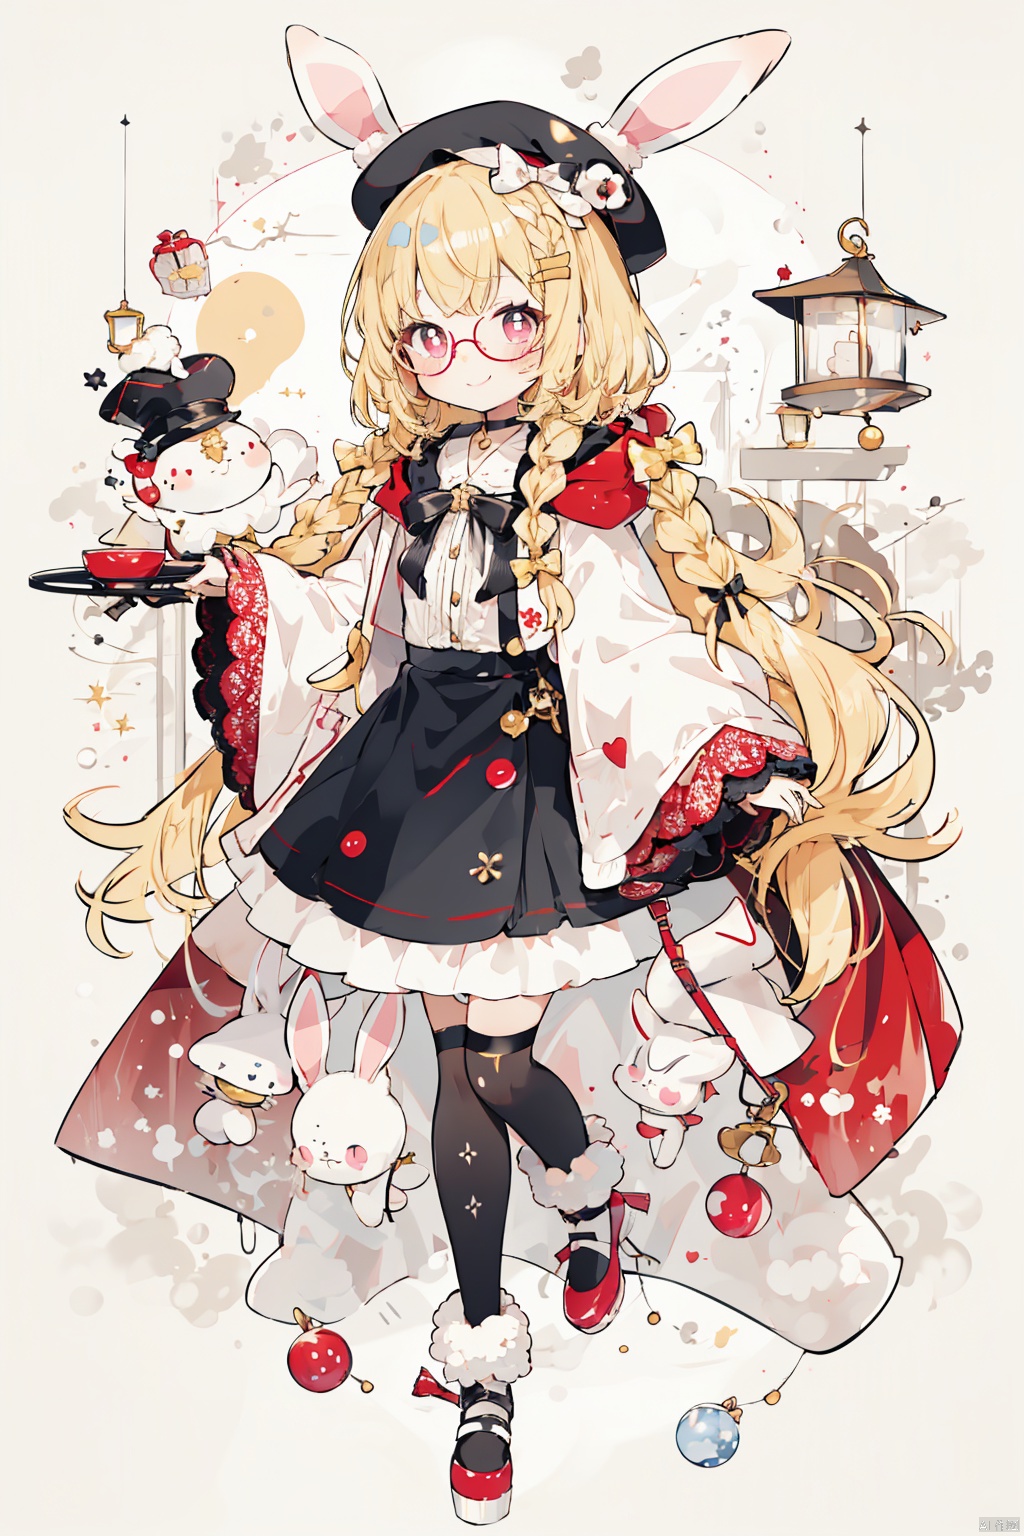  Blonde hair color, braids, double ponytail, beret, bunny ear hat, glasses, pink pupils, black lace skirt, smile, bow, full body, looking at the audience, Female focus, Wide sleeves, puffy skirt, black over knee socks, 1girl, Red Cape, hood, white shirt, gamepad around , Pink Rabbit, msaibo